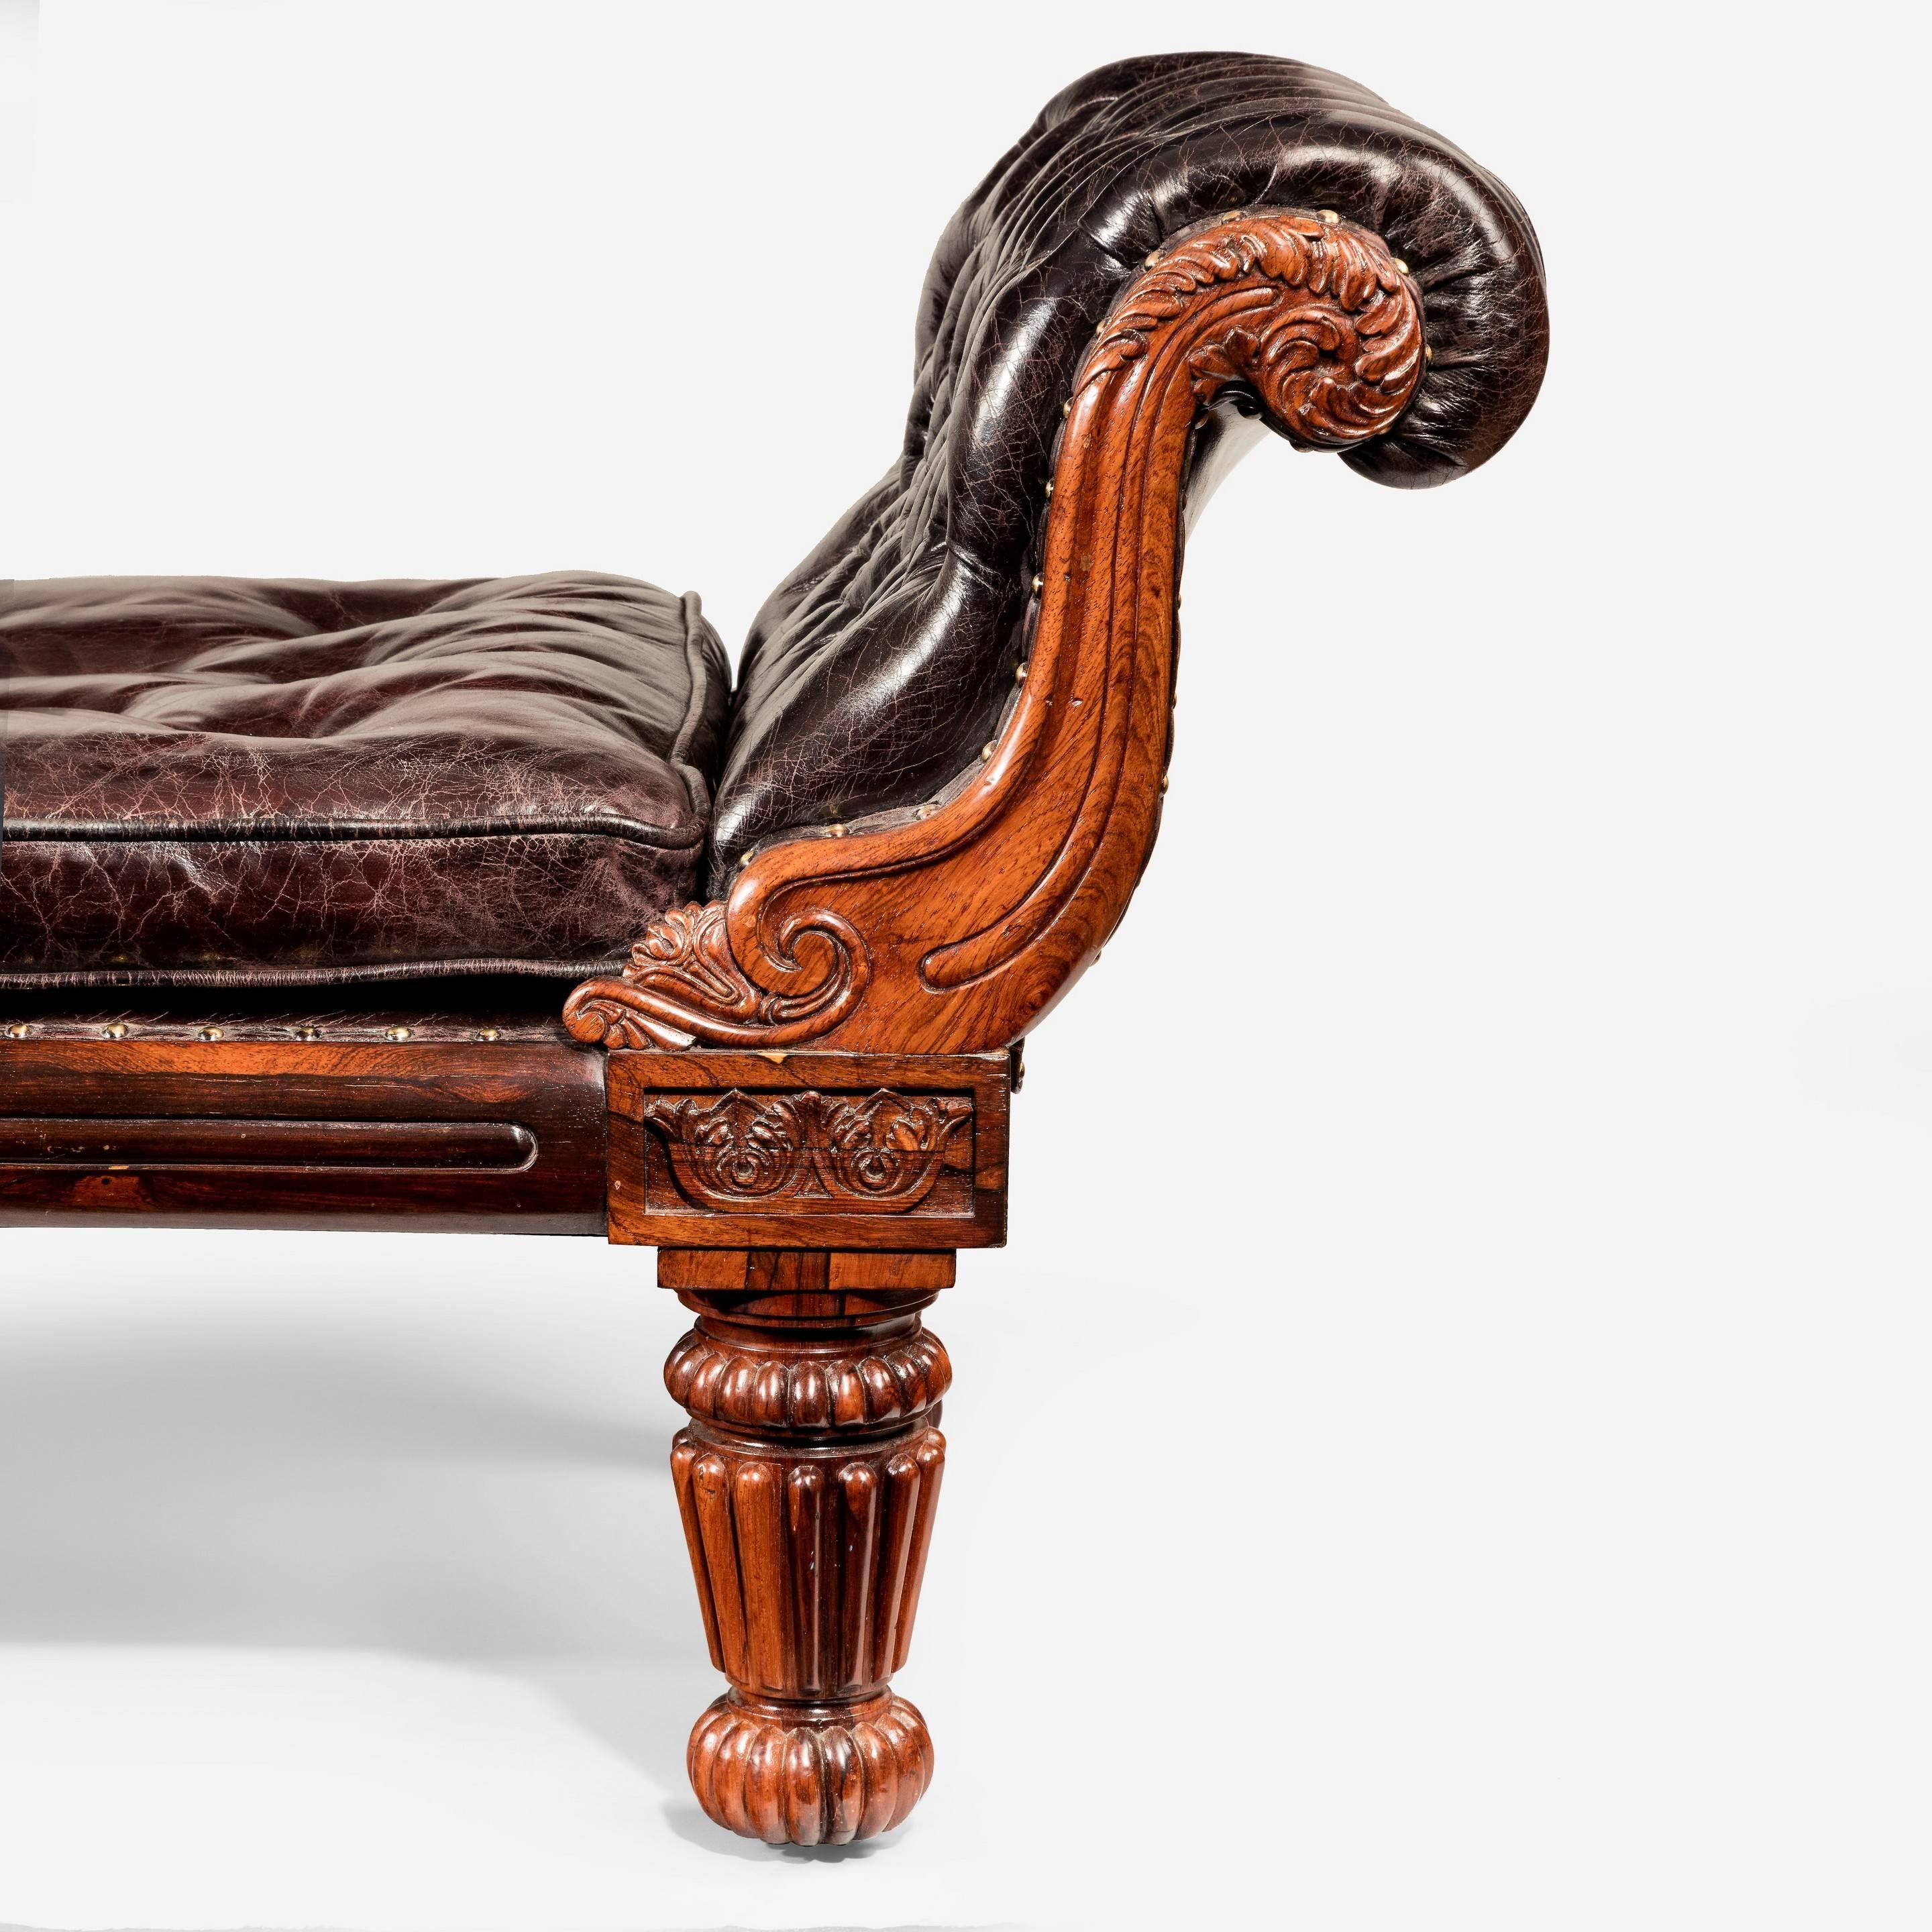 William IV Rosewood Chaise Longue Attributed to Gillows In Good Condition For Sale In Lymington, Hampshire